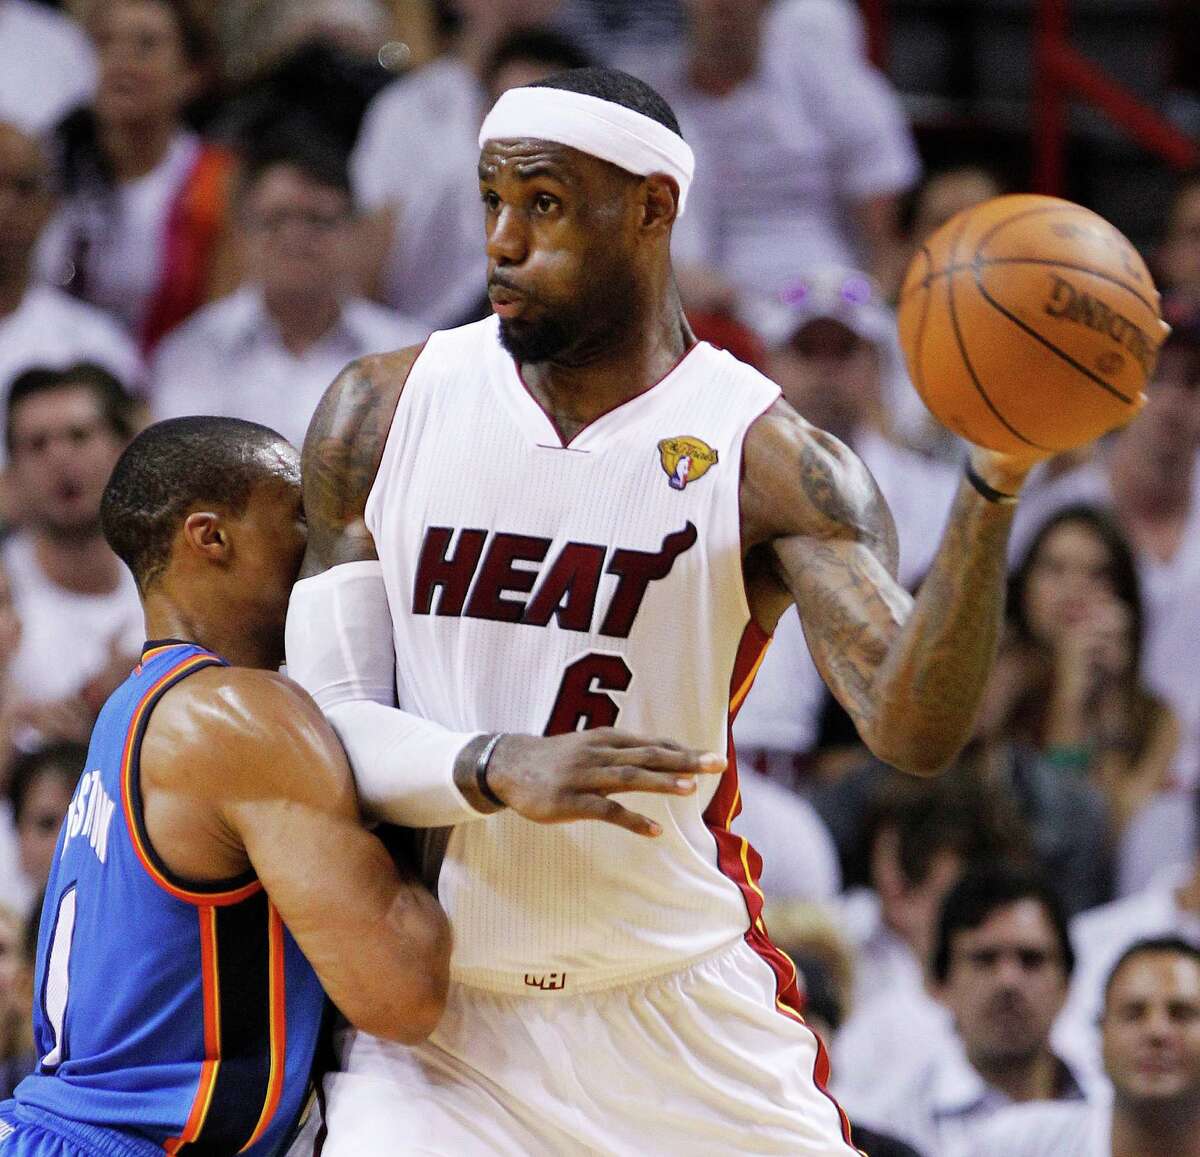 Miami Heat small forward LeBron James (6) looks to pass against Oklahoma City Thunder point guard Russell Westbrook (0) during the second half at Game 3 of the NBA Finals basketball series, Sunday, June 17, 2012, in Miami. (AP Photo/Lynne Sladky)